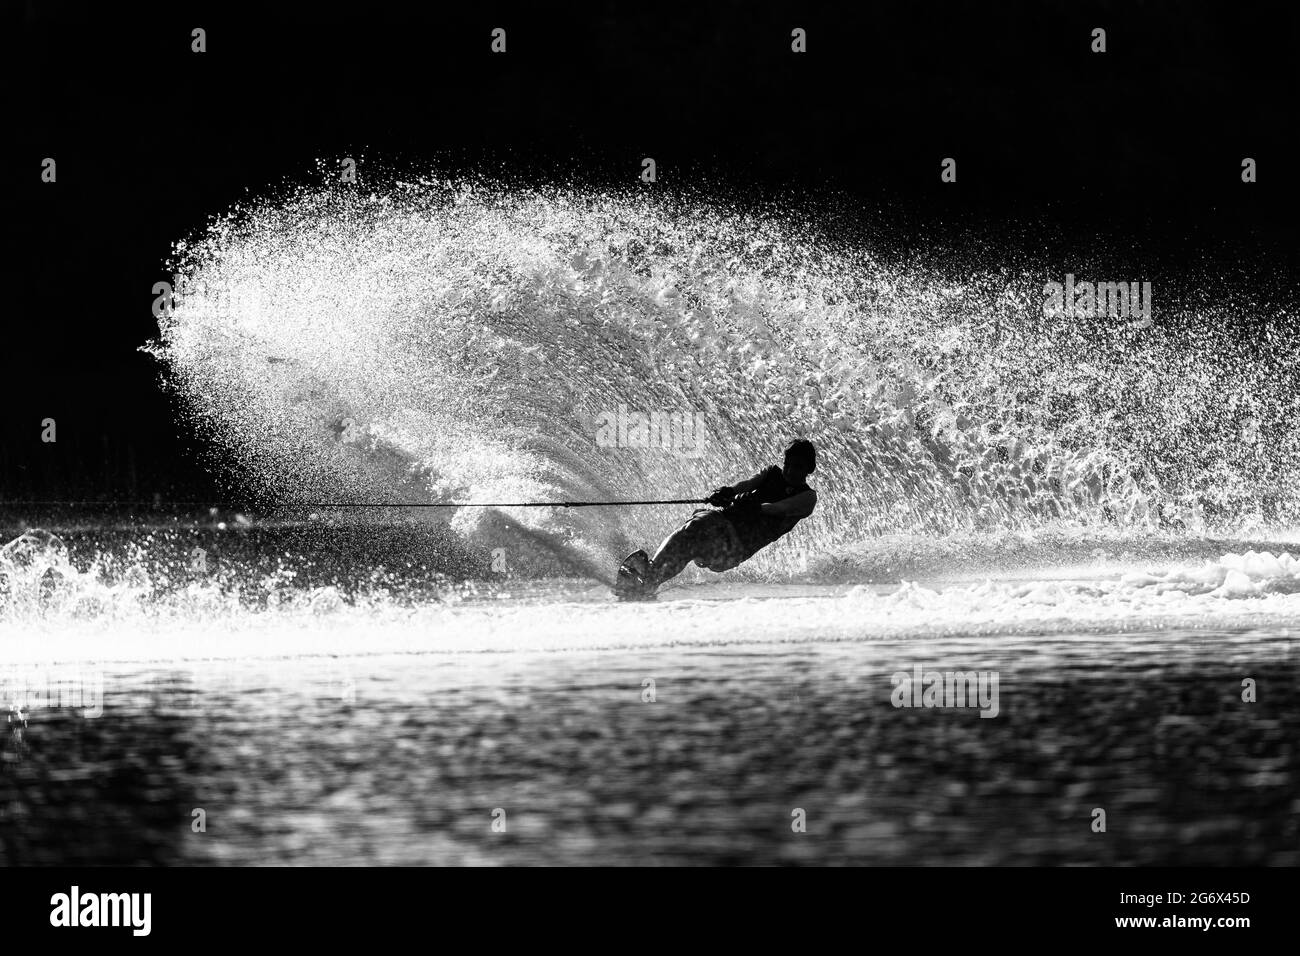 Water ski young Man unrecognizable athlete skiing slalom carves a vertical water wake spray  in vintage sepia black white tone for a dramatic contrasts Stock Photo